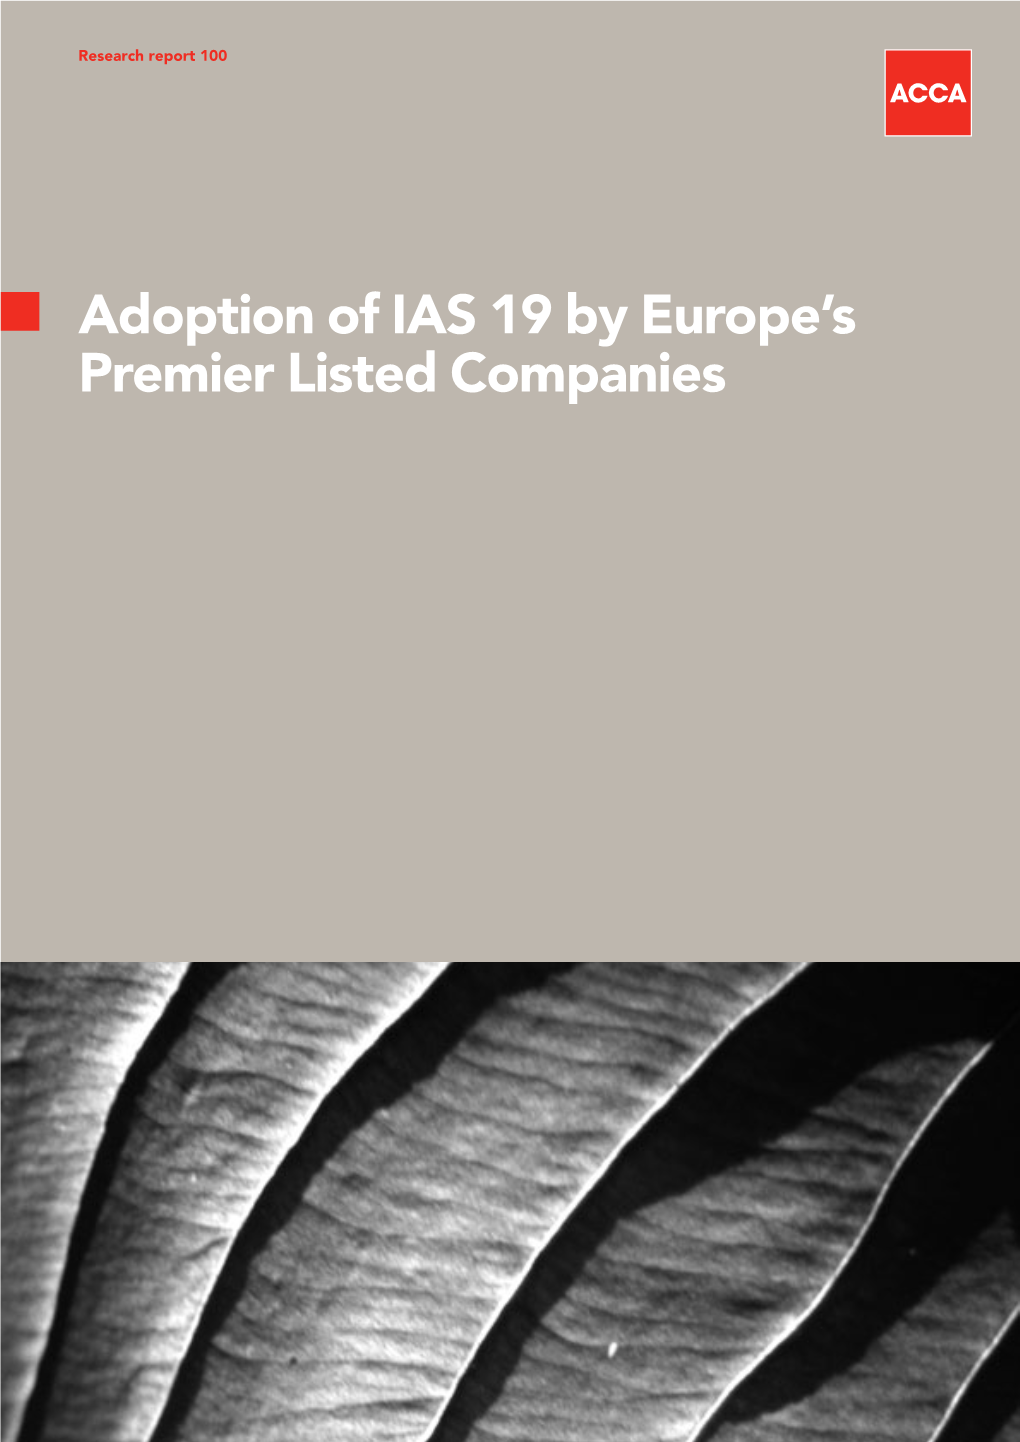 Adoption of IAS 19 by Europe's Premier Listed Companies